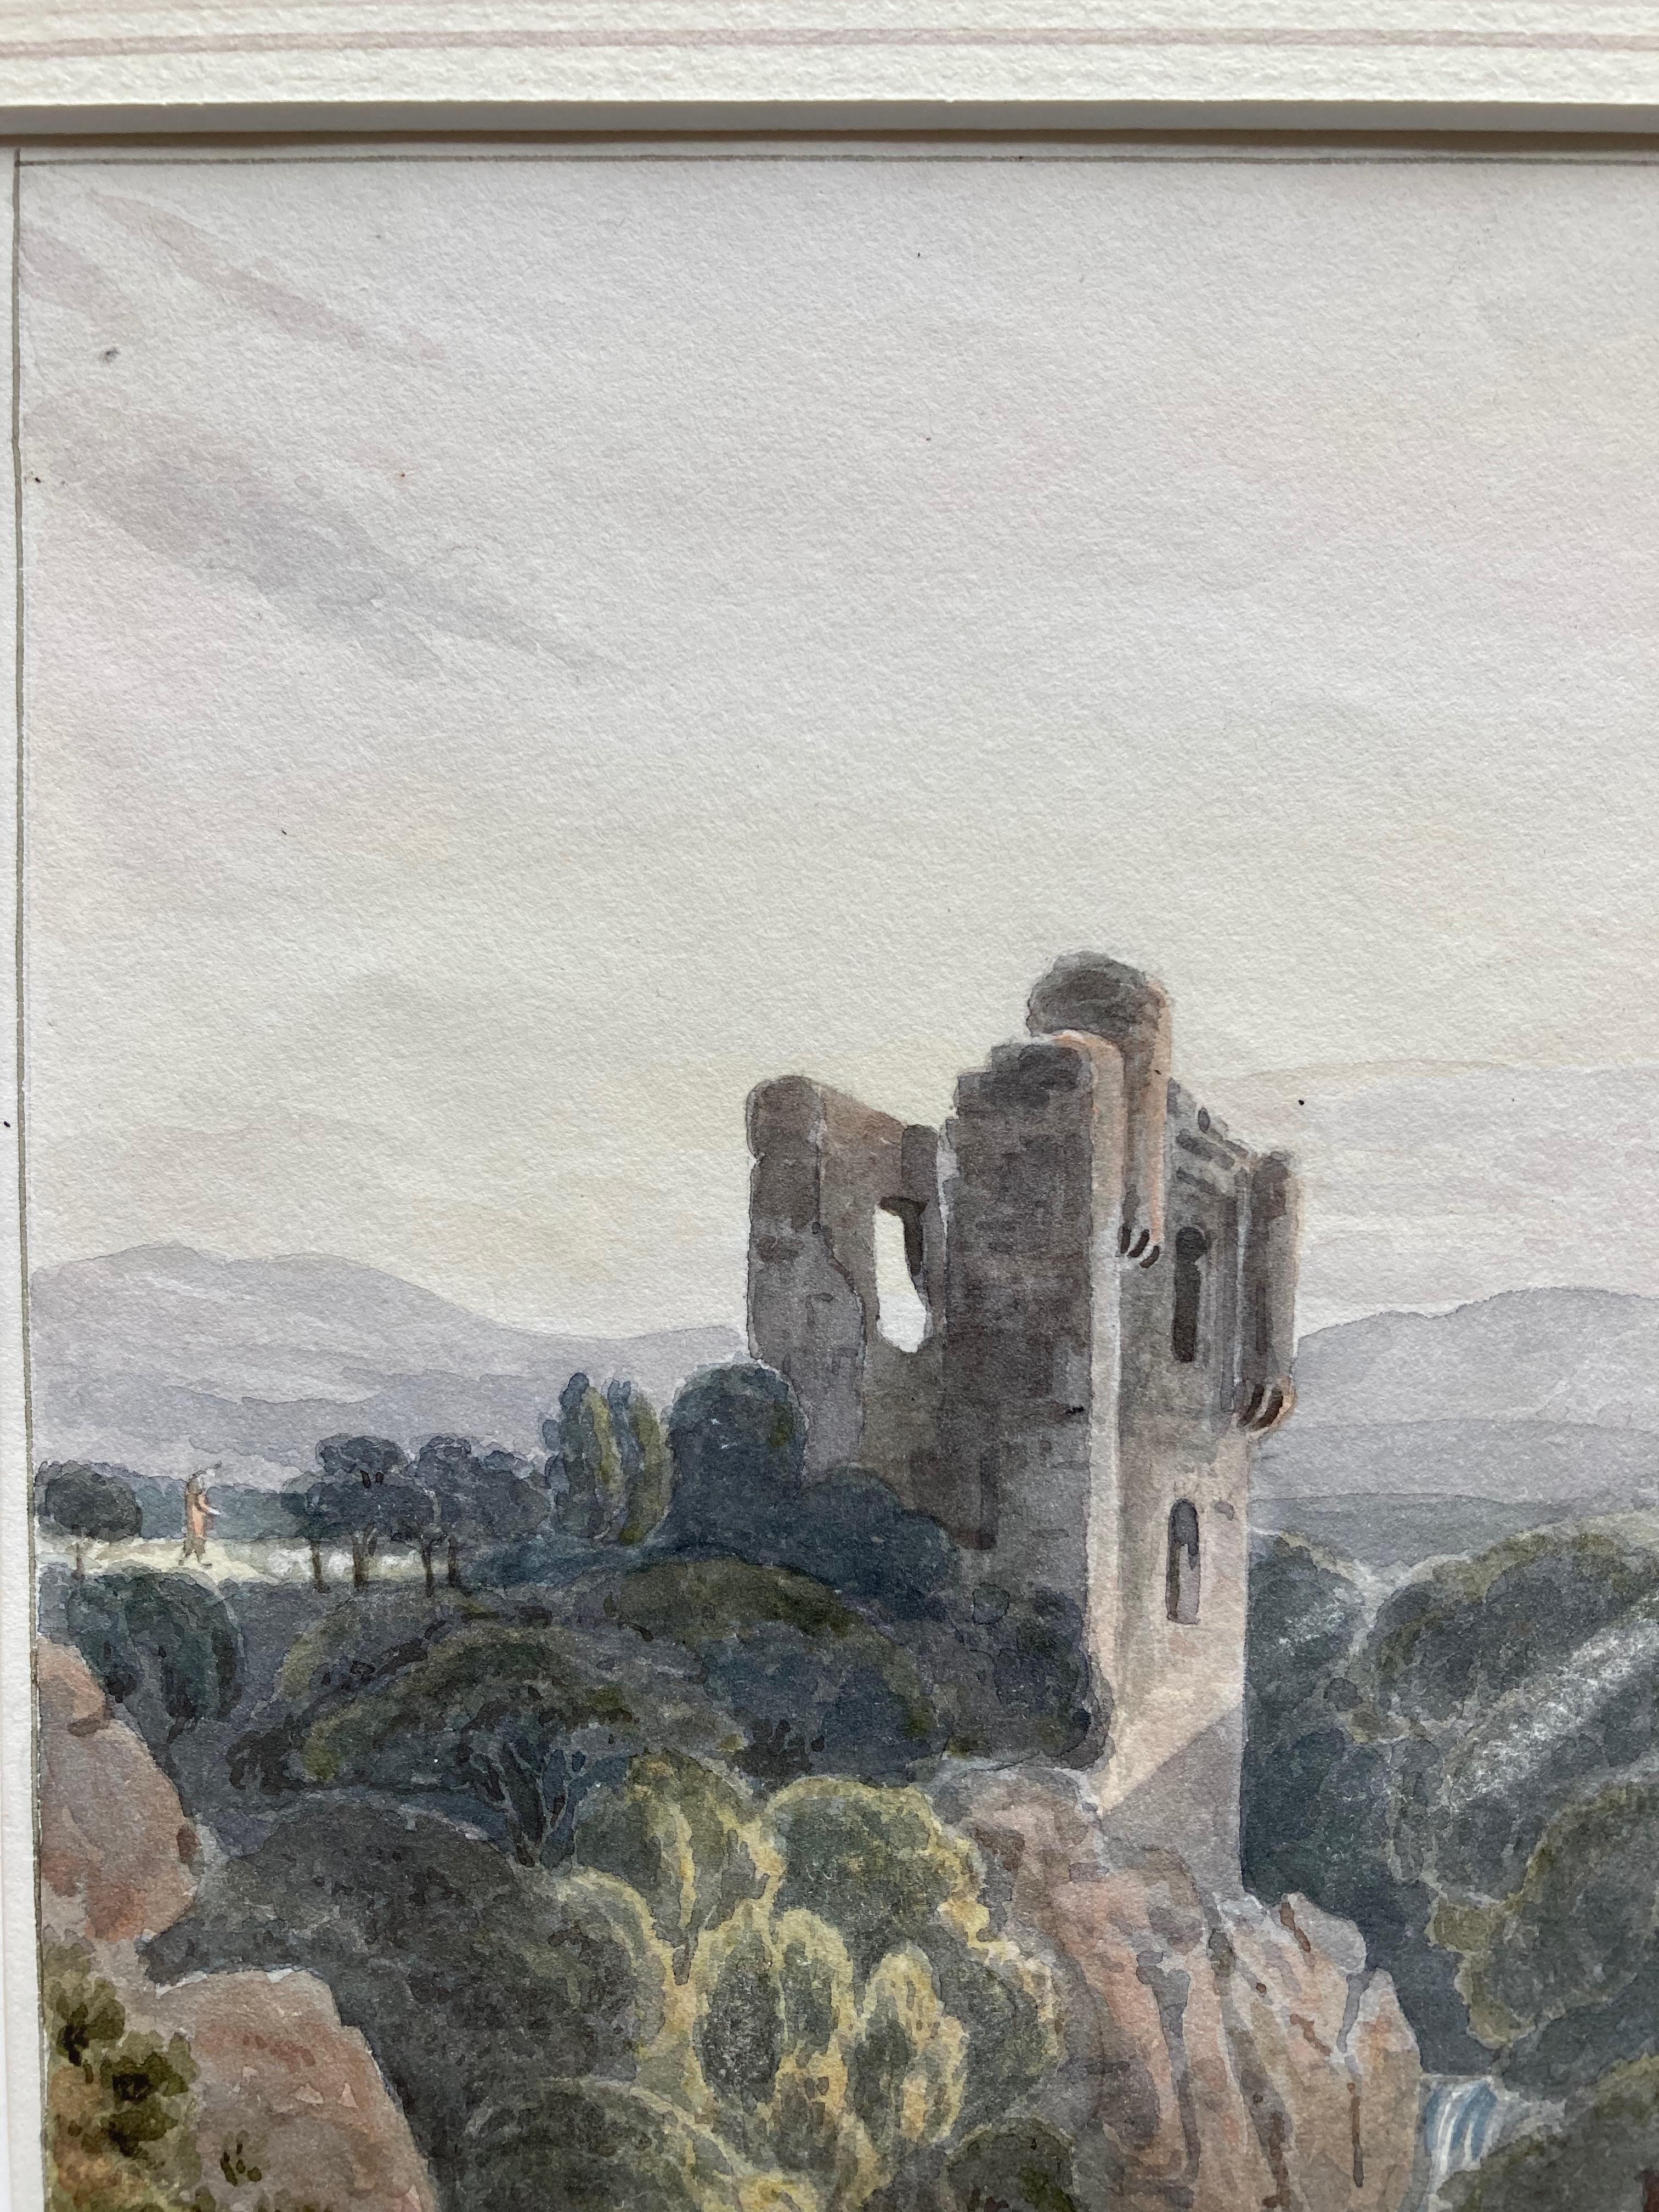 An enchanting 19th century watercolor with figures before a castle in a river landscape.

Circle of Samuel Prout (1783-1852)
Figures before a castle in a river landscape
Watercolour
8 x 6 inches
14 x 11½ inches with the frame

Presented in a gilt